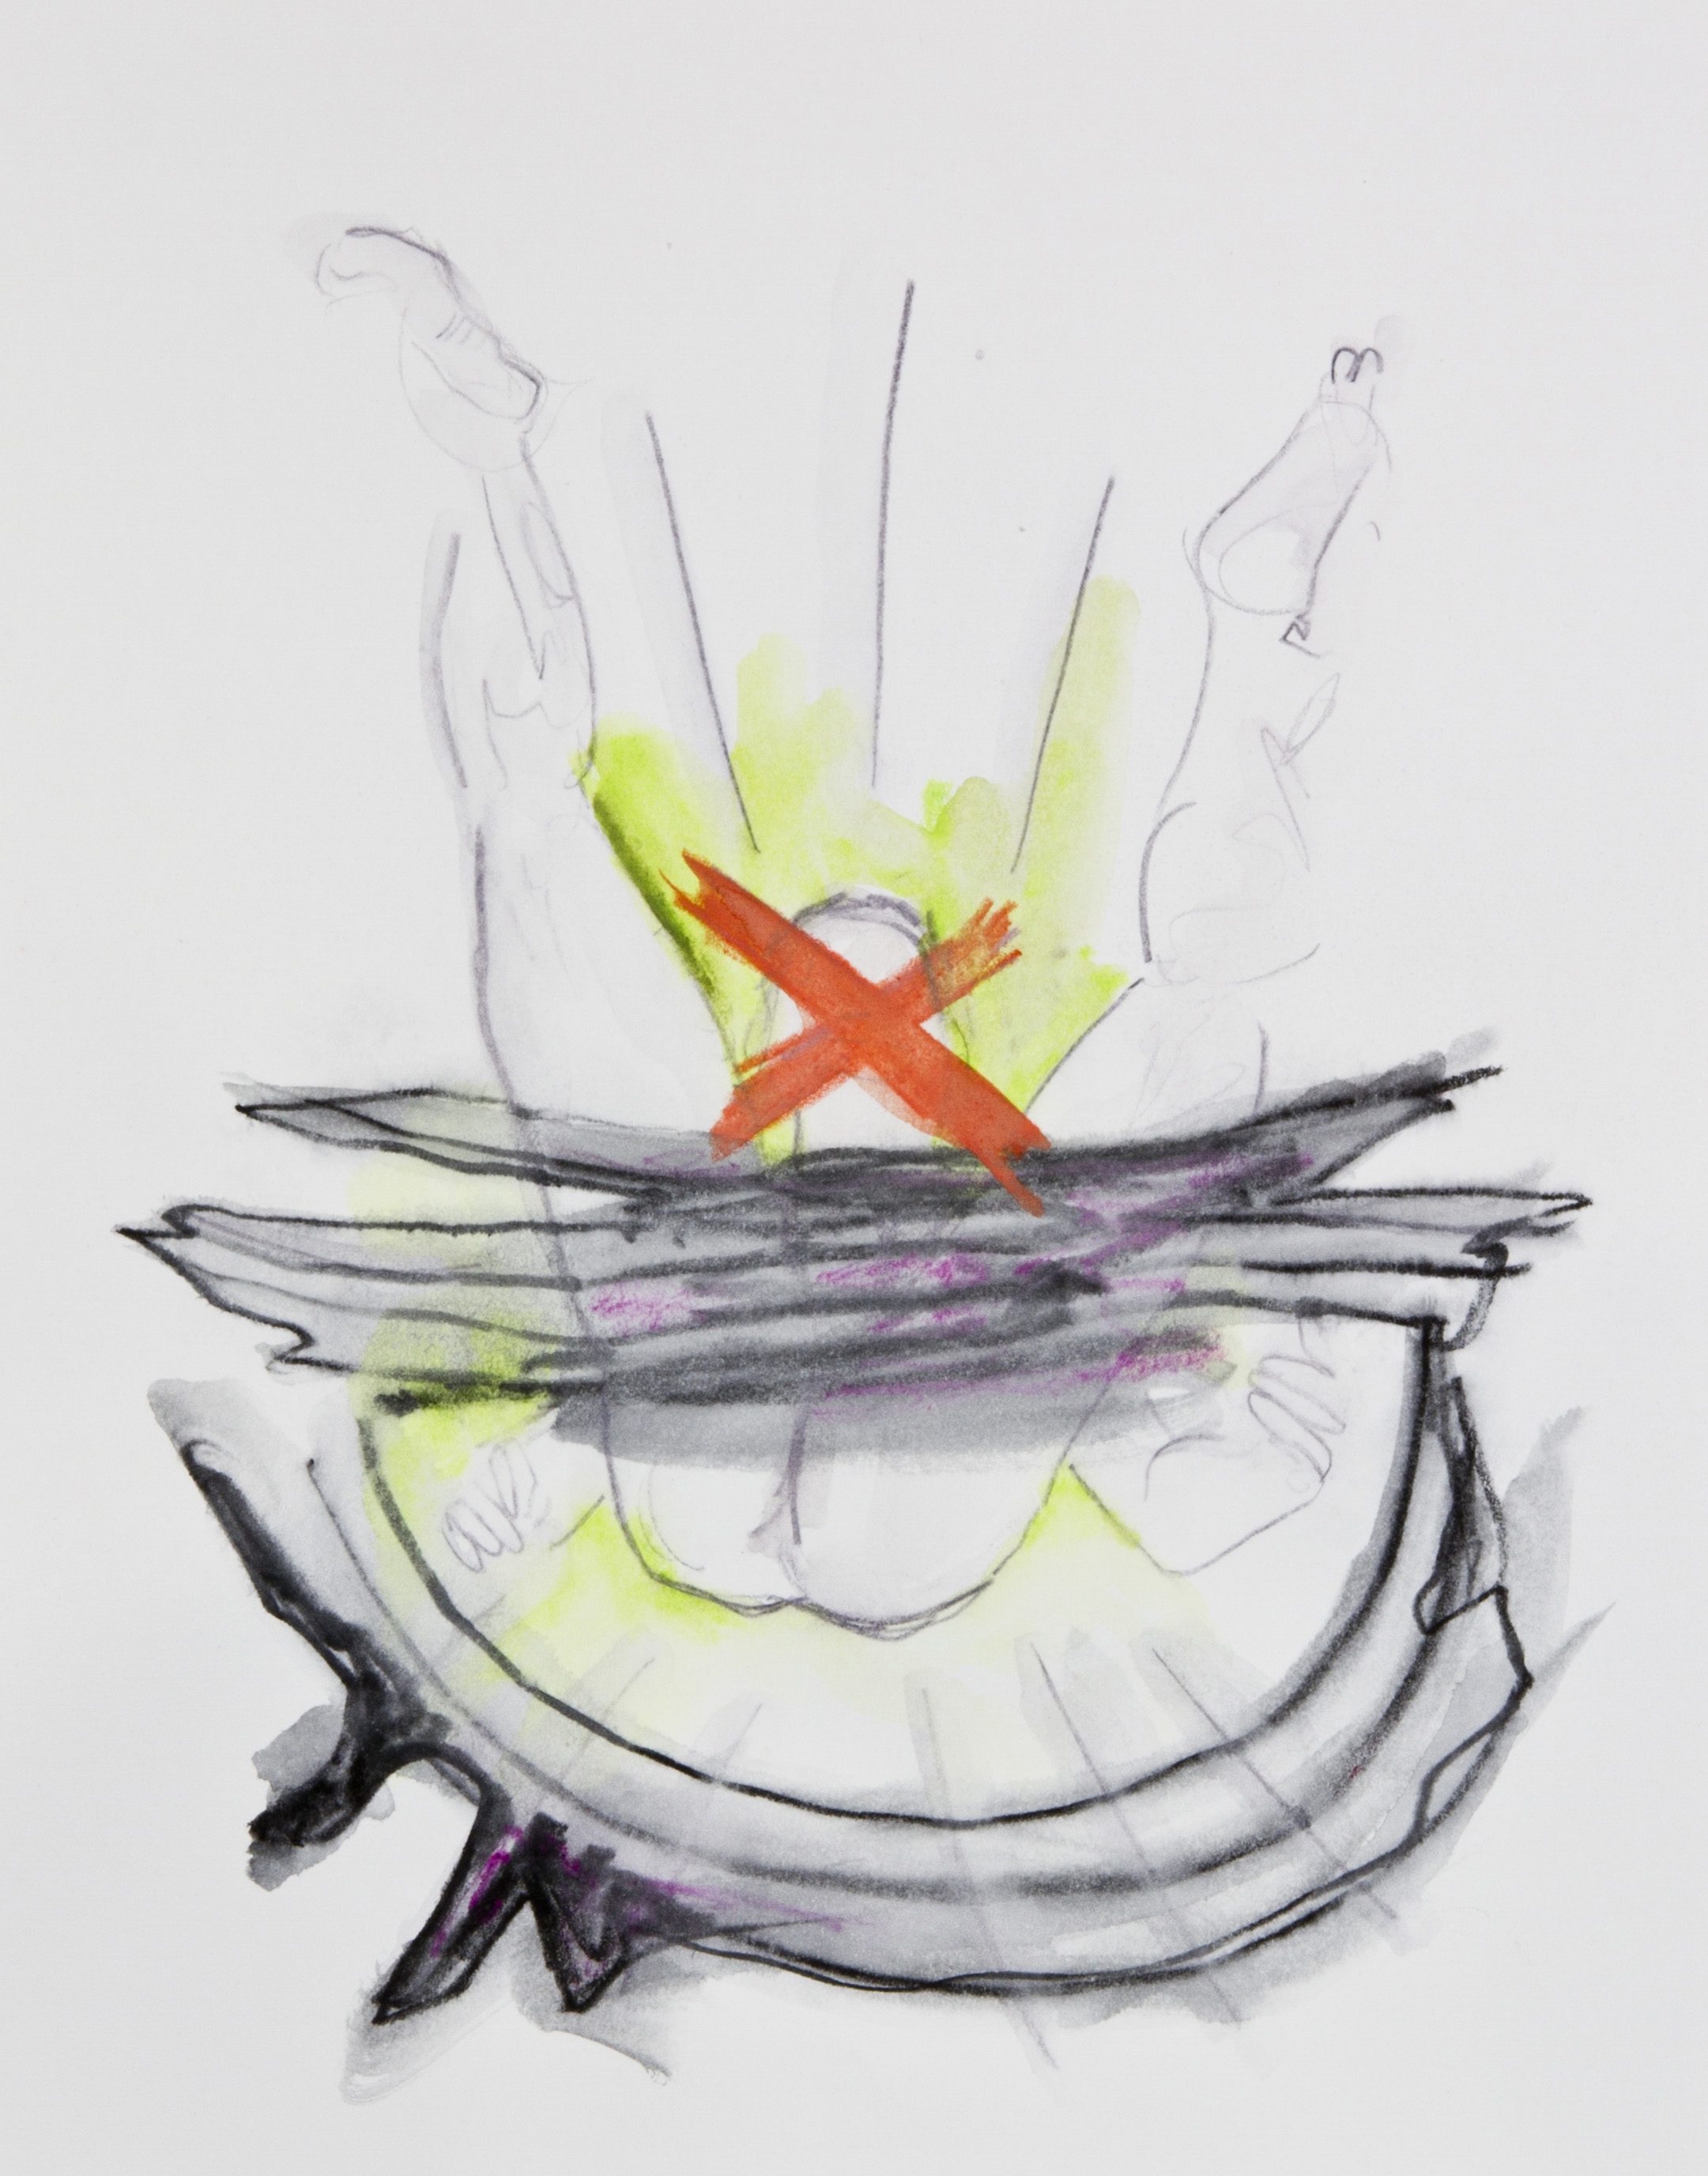 X Display, 2013, graphite, crayon and watercolor pencil on paper, 11x14 inches